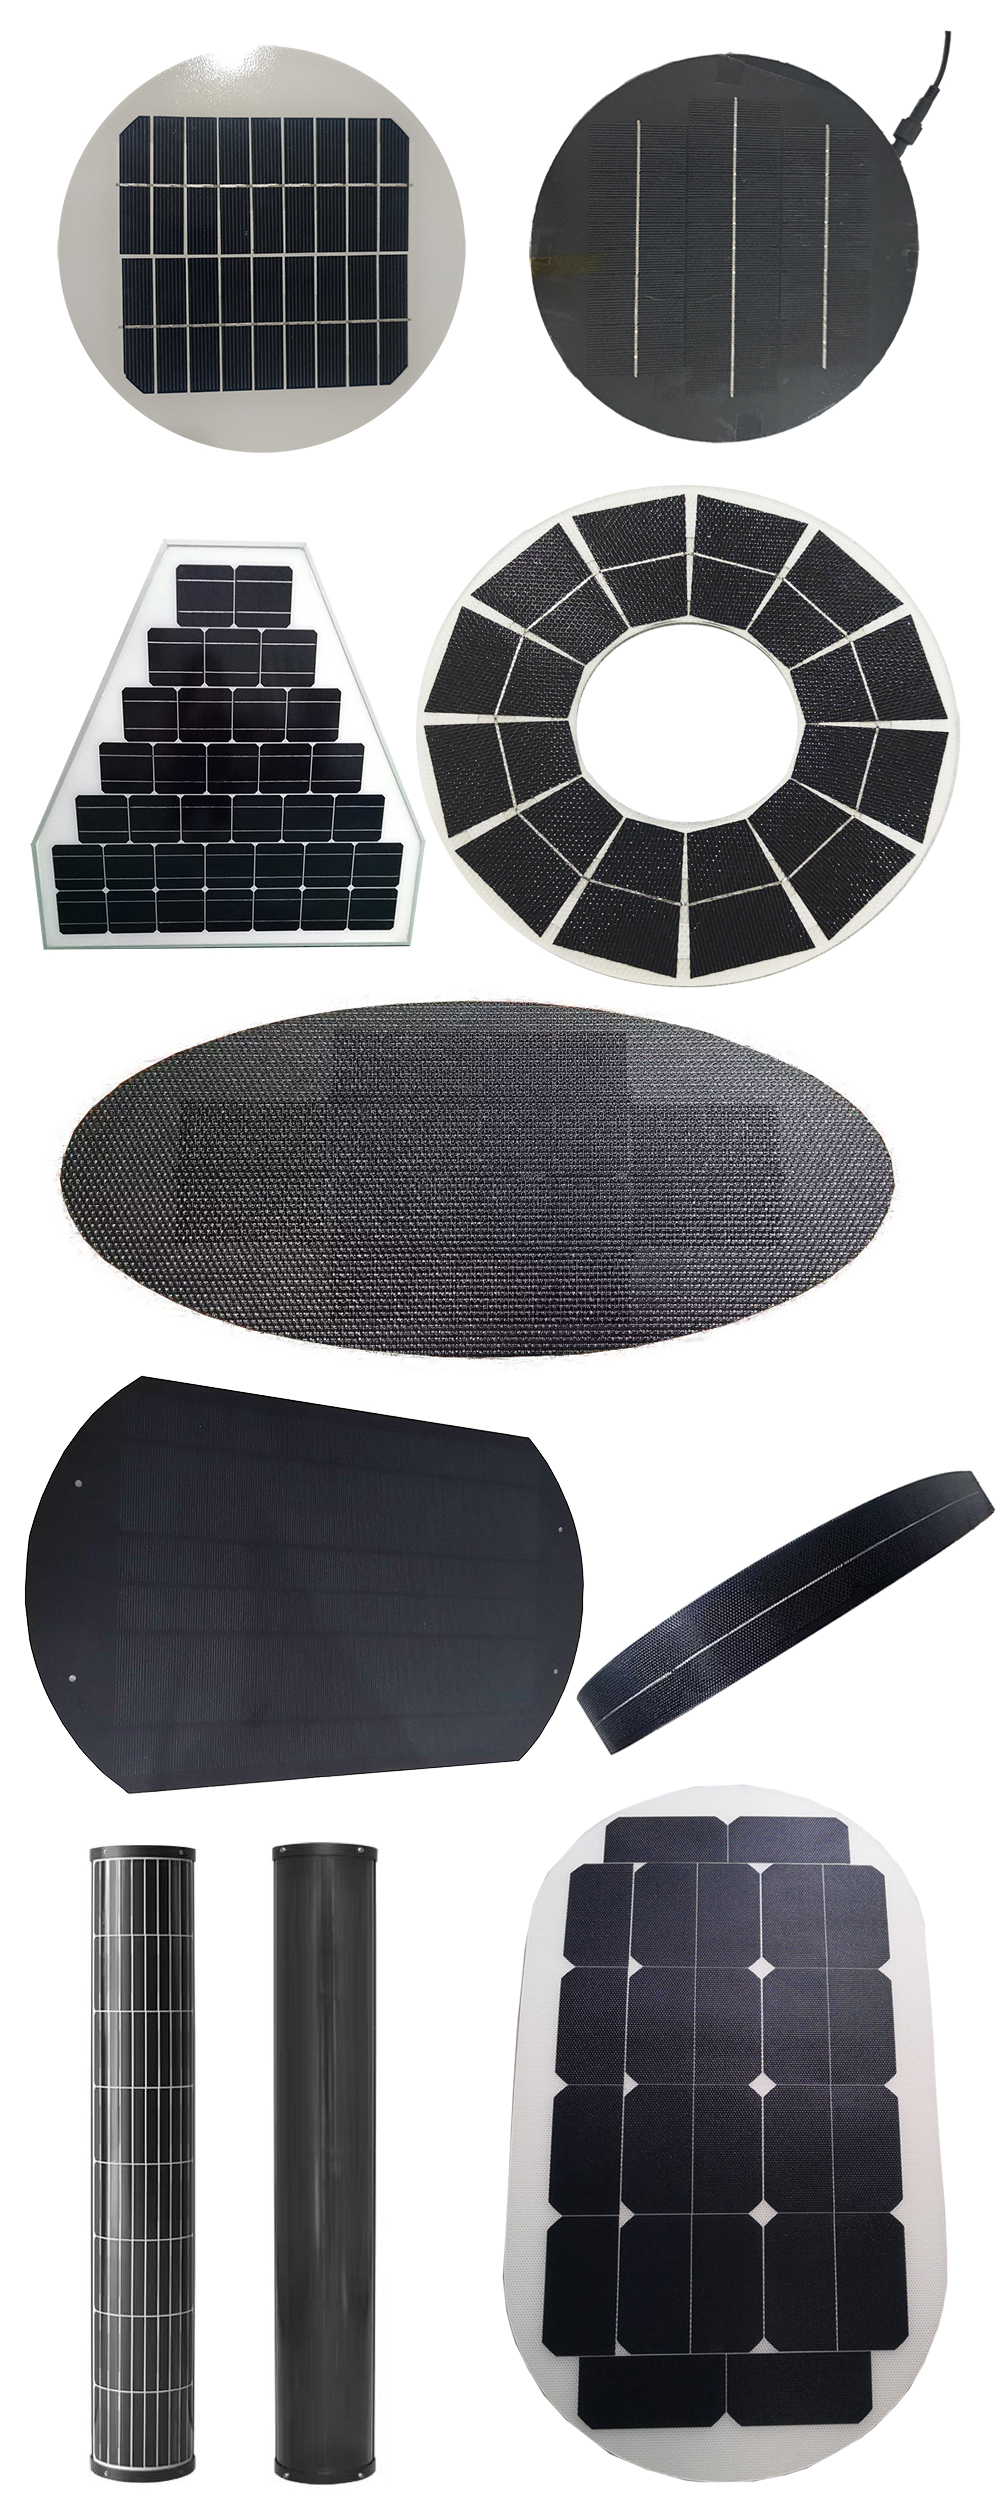 samples of different pv panel